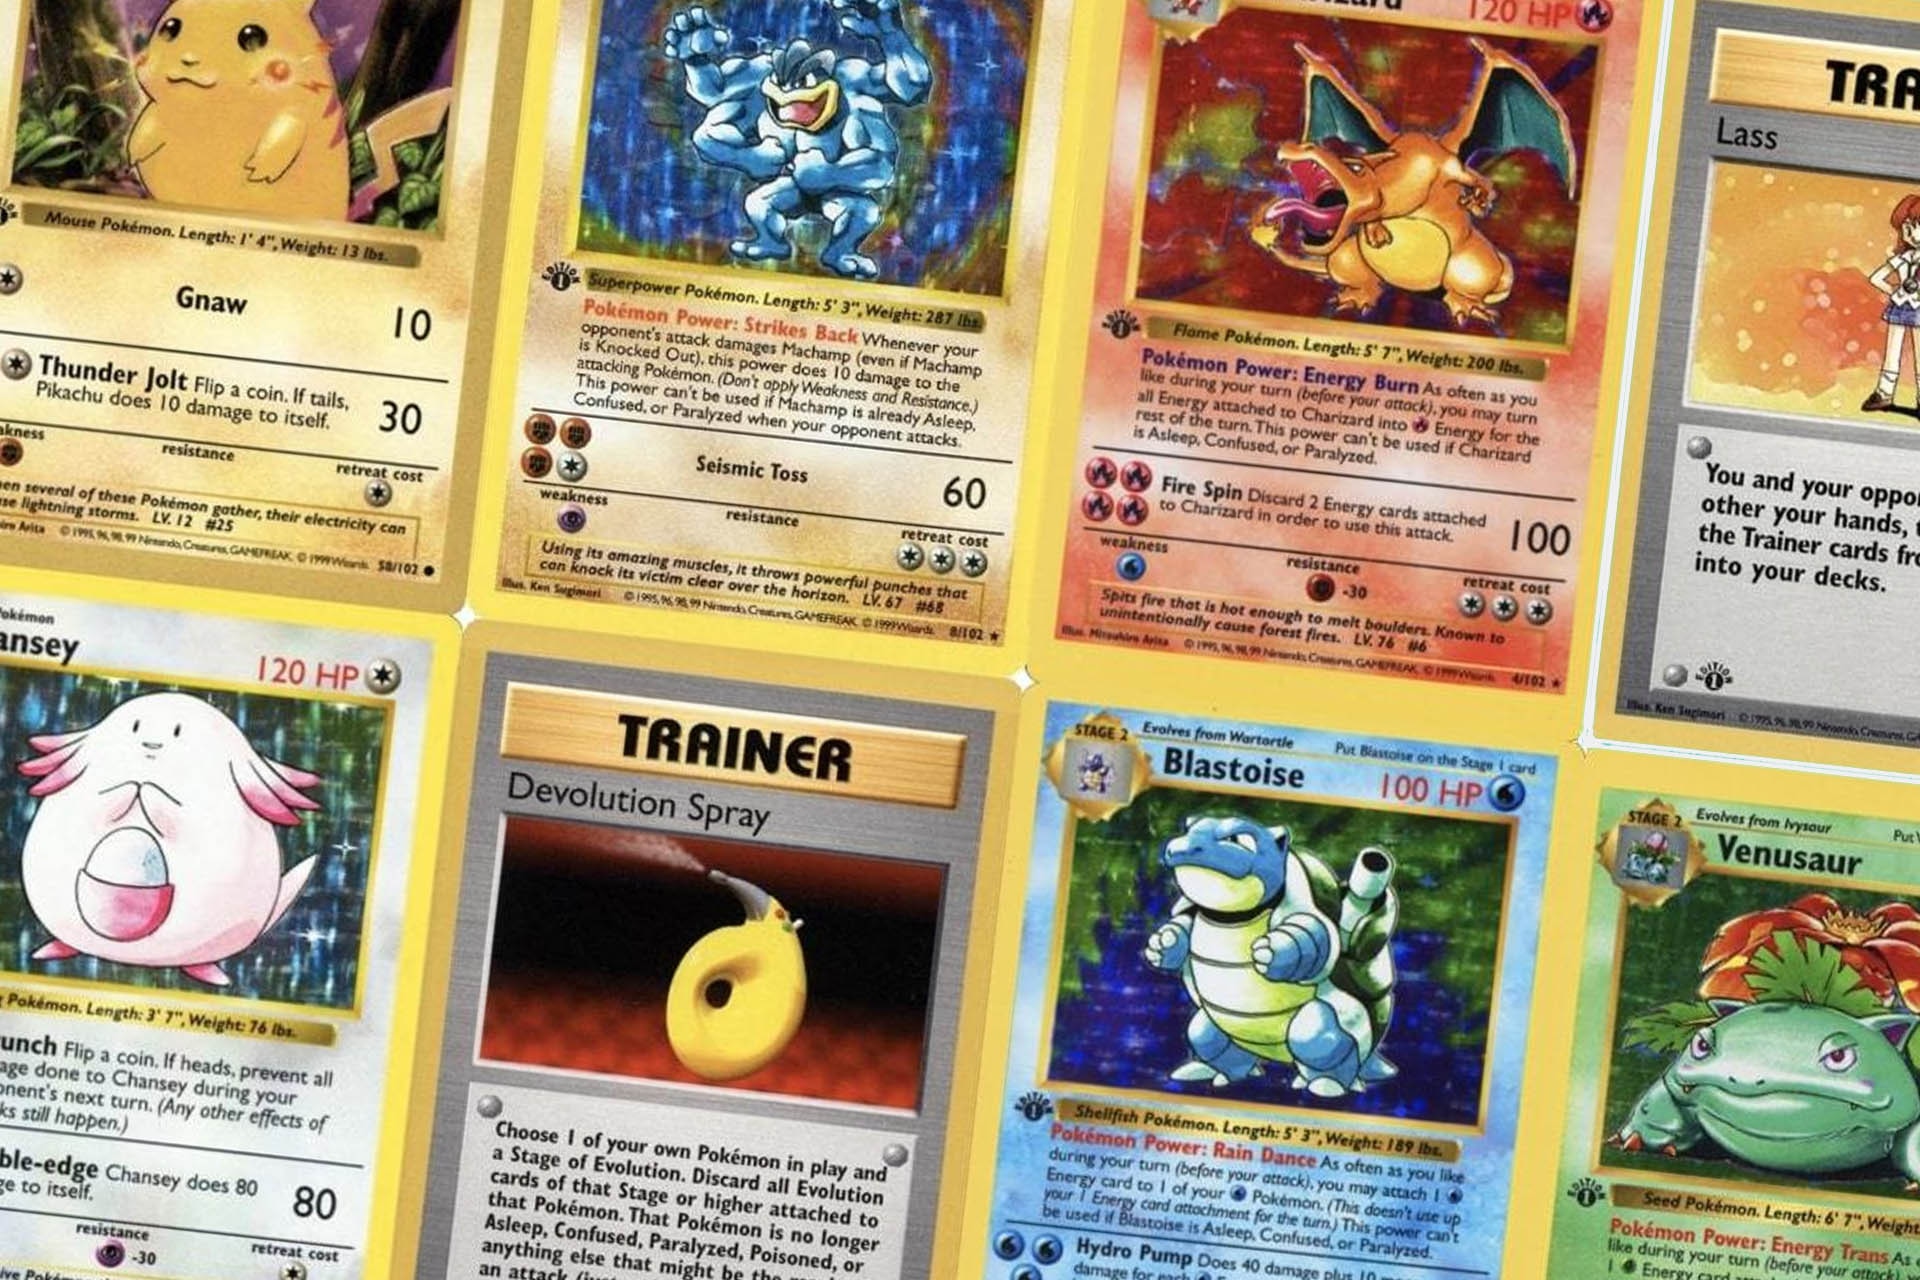 The Rarest Pokémon Cards Of All Time, kangaskhan - promocional - family  event trophy card 